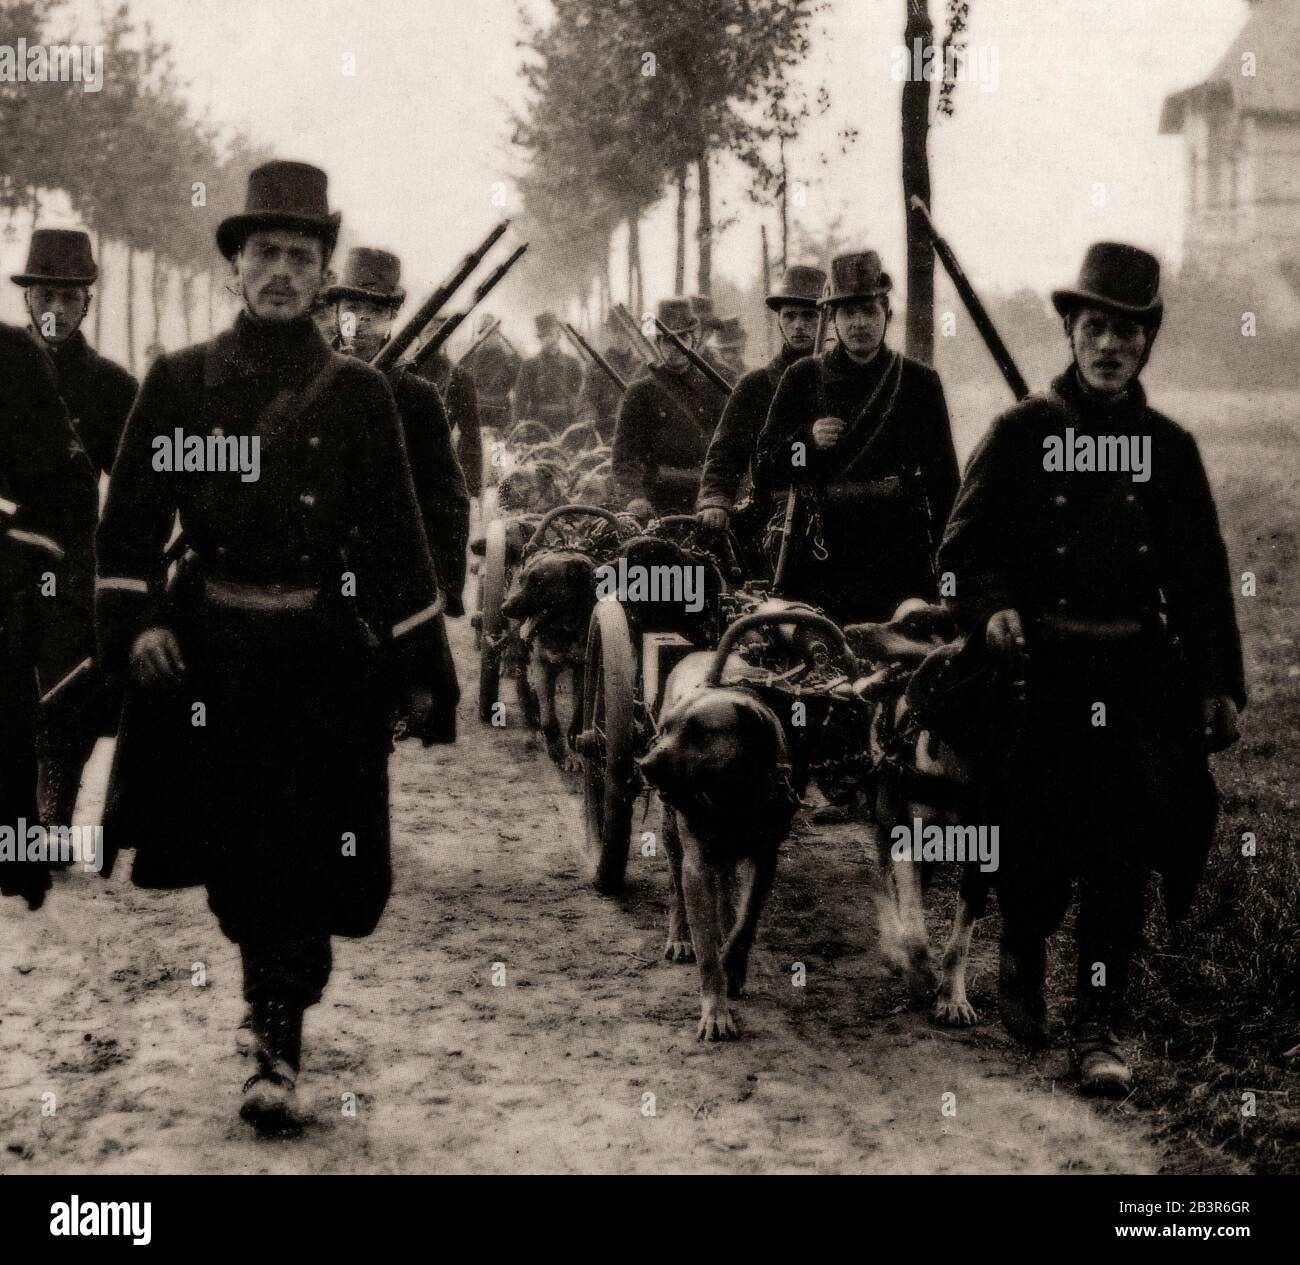 Belgian carabiniers, with dogs trained to draw machine guns, during their retreat to Antwerp in August, 1914. A carabiniere was a soldier armed with a carbine, a shorter version of a musket or rifle, lighter and easier to handle when moving rapidly.  The withdrawal to Antwerp was ordered by King Albert I following the fall of the Liege forts. The Belgian Army re-grouped at the 'National Redoubt' at Antwerp, which consisted of over 40 forts and several lines of defences. The Germans finally launched an all-out attack on Antwerp in September and a siege the city fell on 9 October. Stock Photo